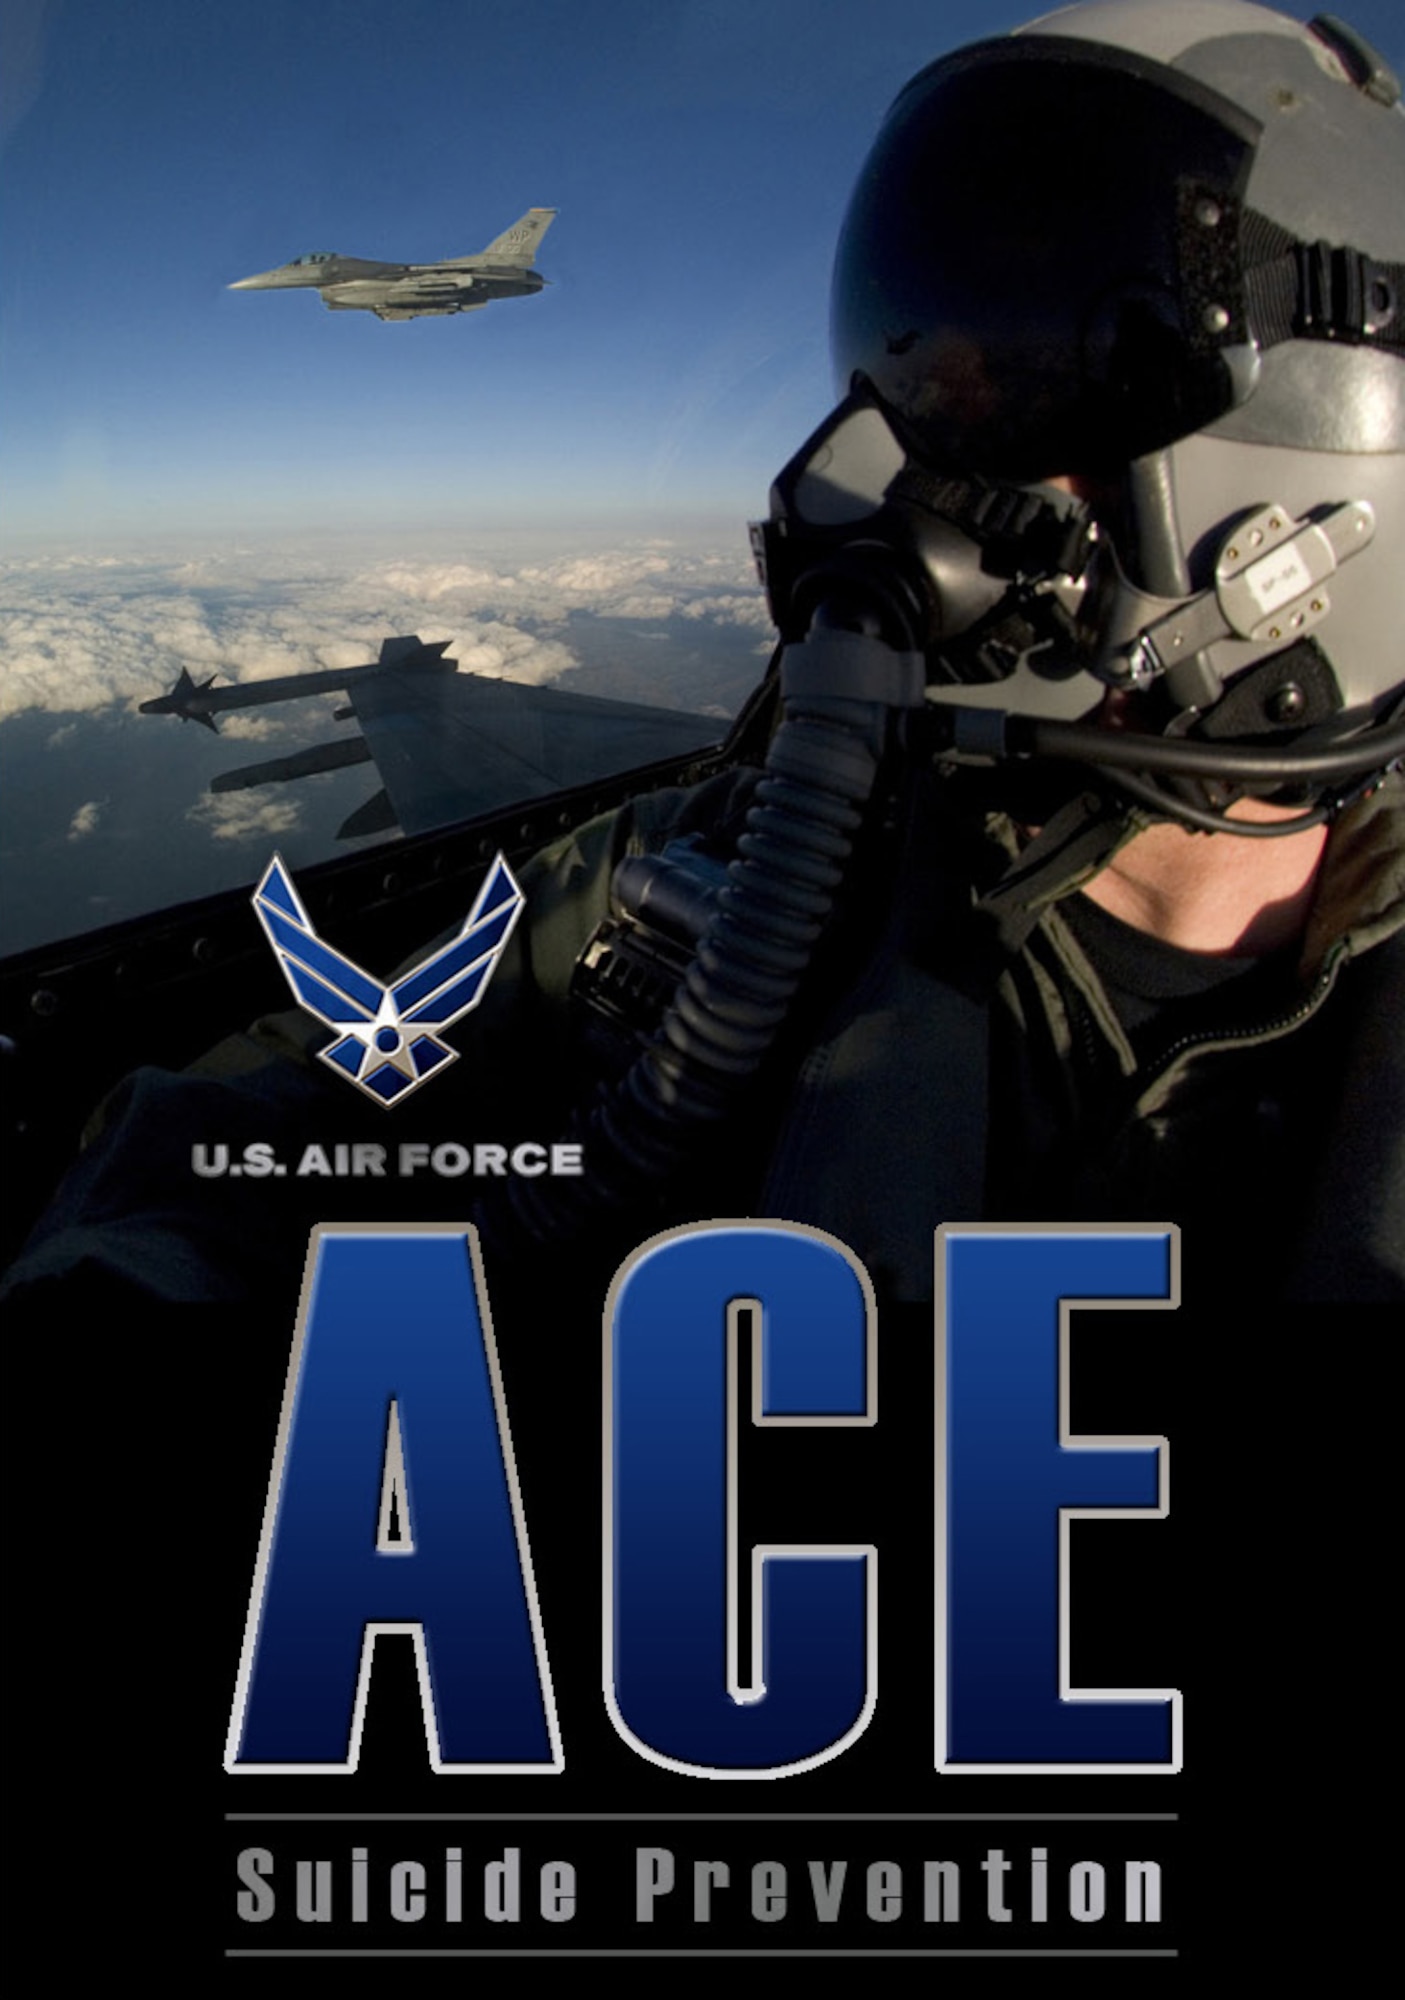 A.C.E.: Ask your wingman, Care for your wingman, Escort your wingman